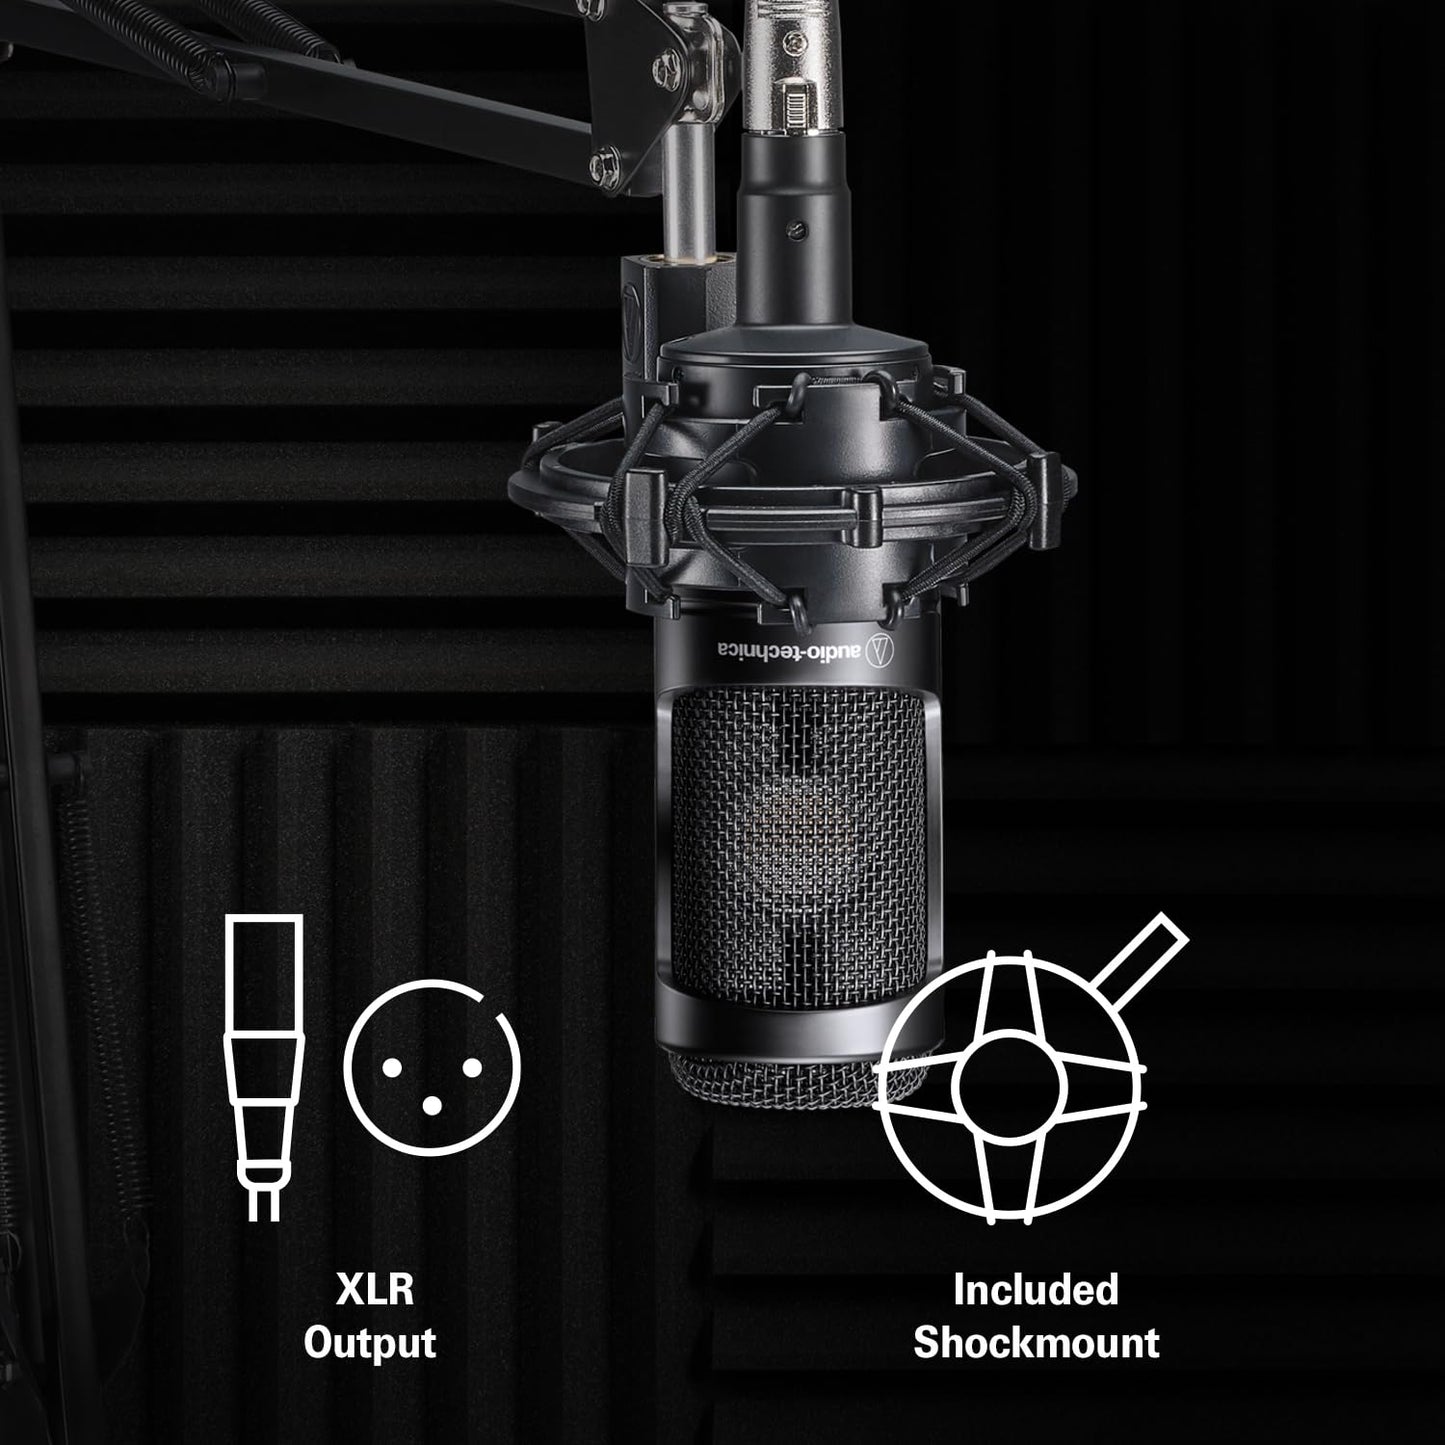 Audio-Technica AT2035 Cardioid Condenser Microphone, for Studio, Podcasting / Streaming